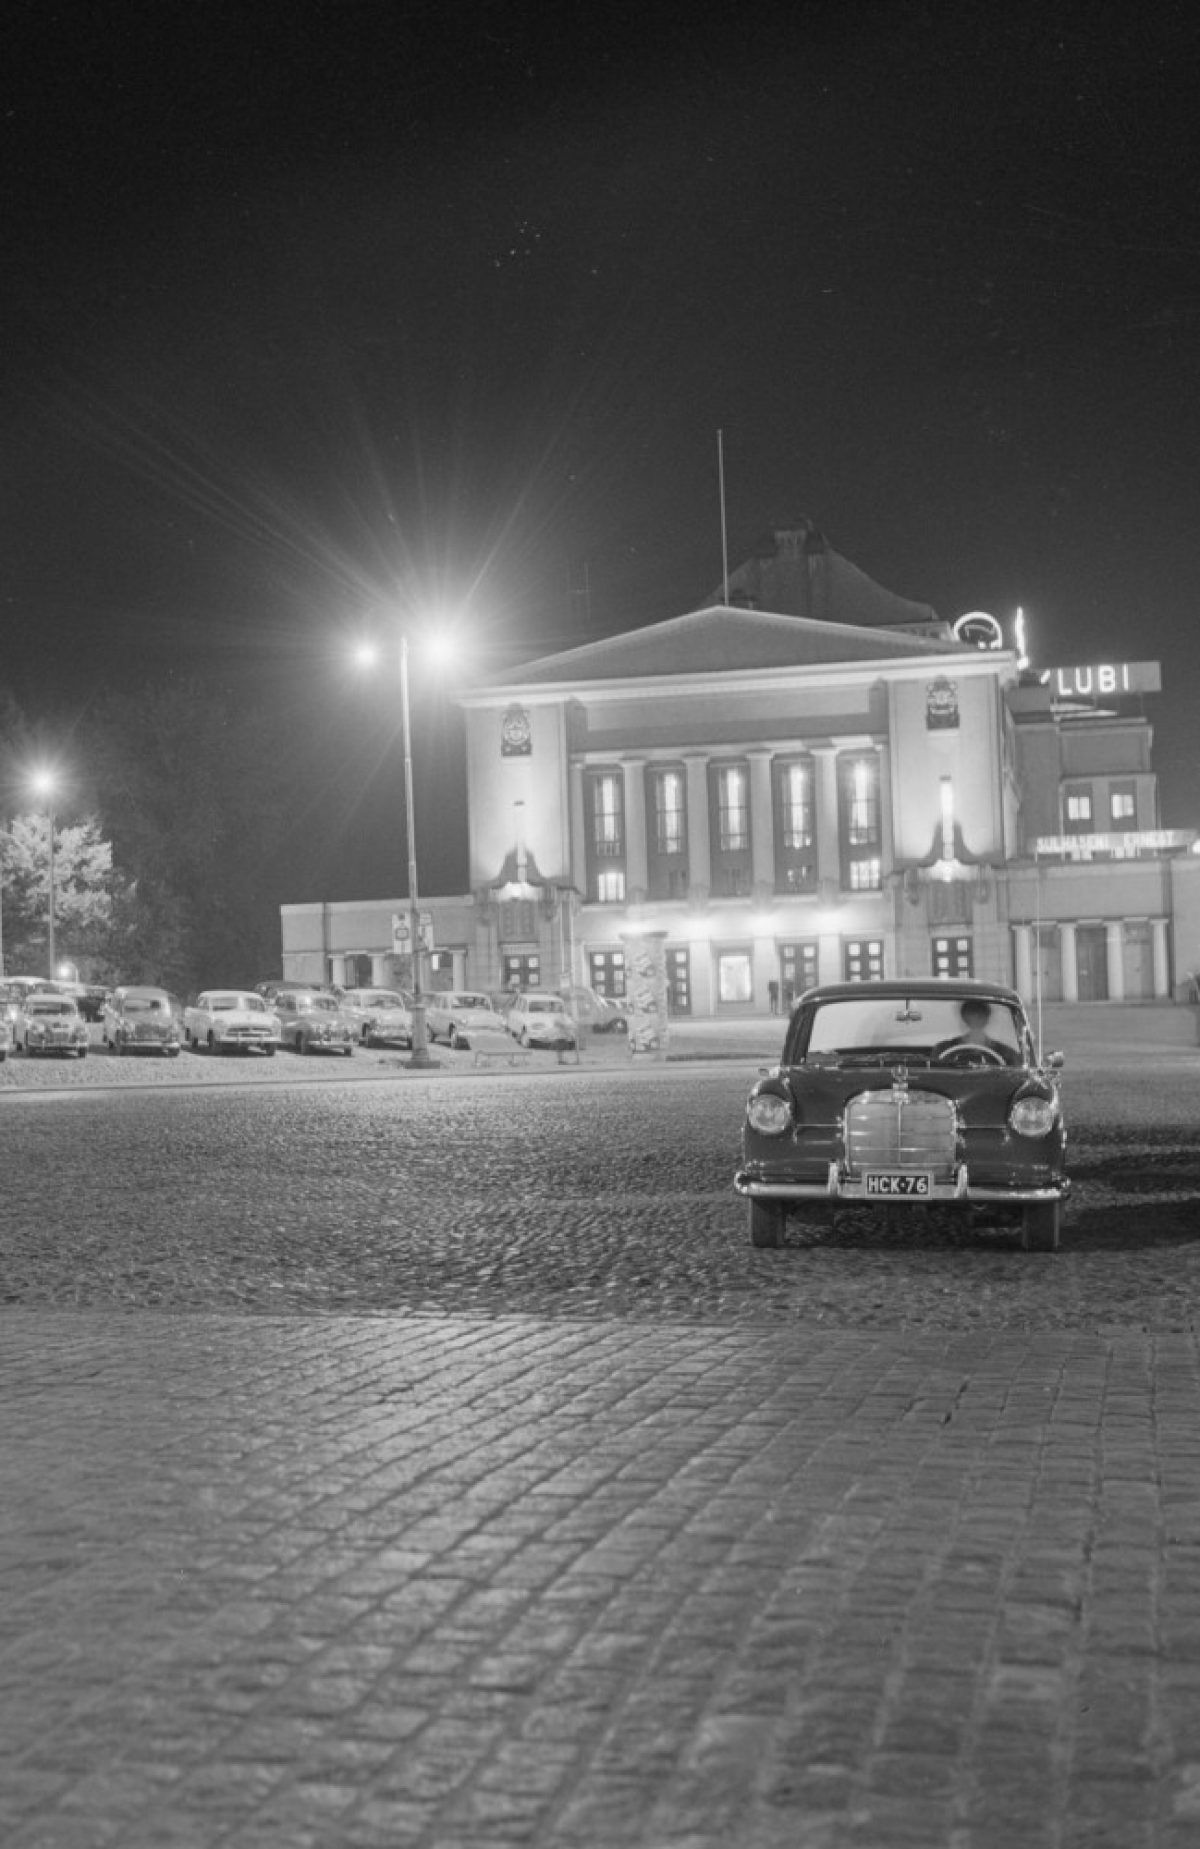 Tampere Central Square, 1963. Photo: Teuvo Kanerva / Picture Collections of the Finnish Heritage Agency